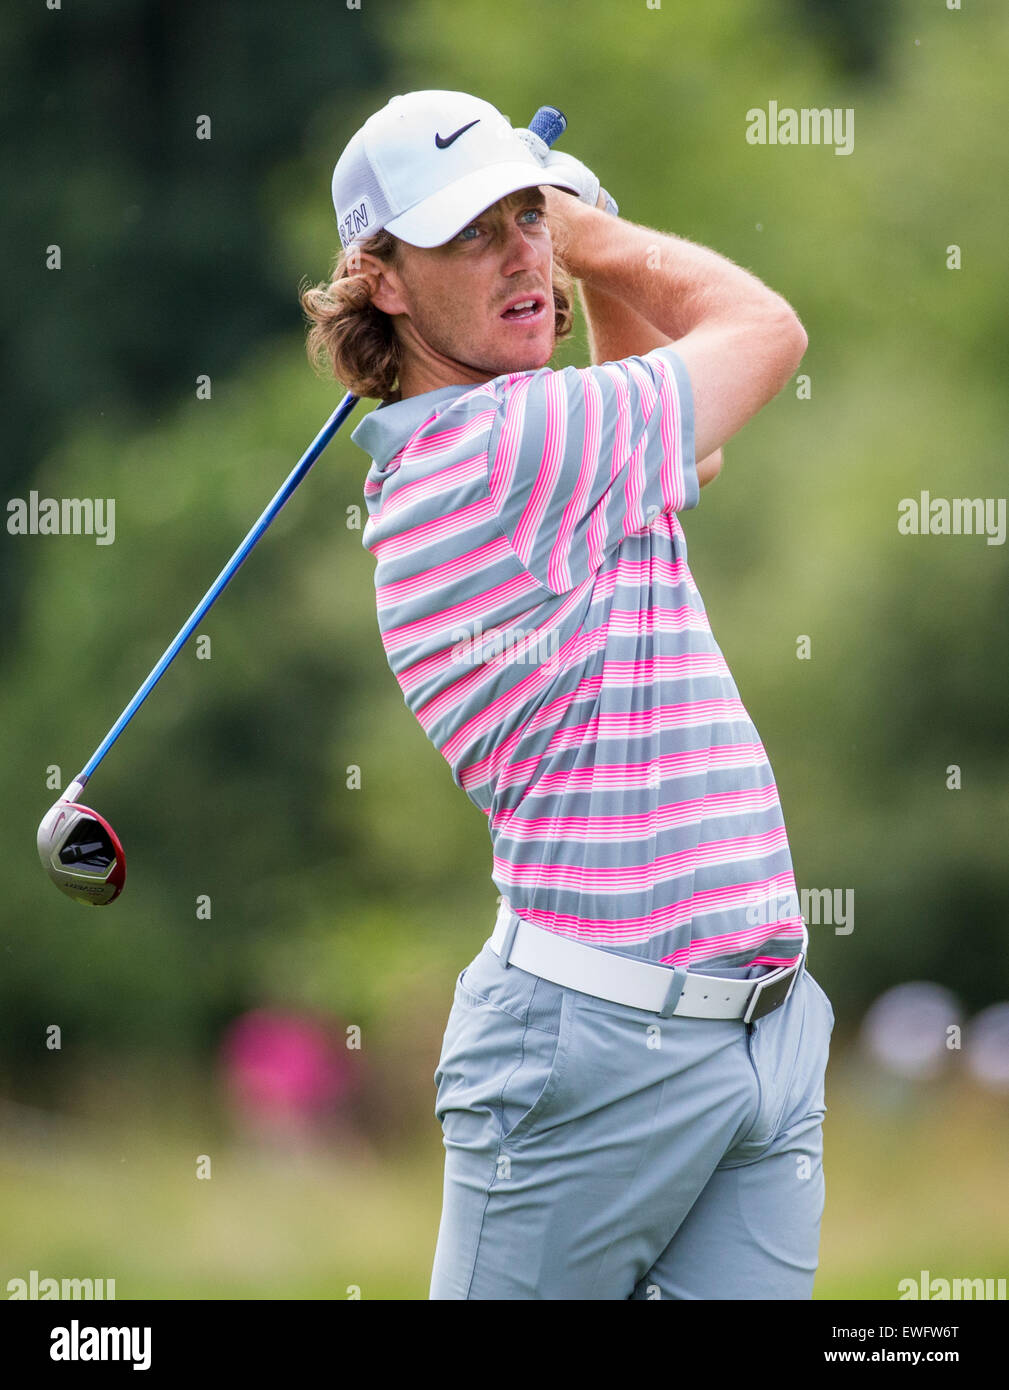 Eichenried, Germany. 25th June, 2015. Tommy Fleetwood of Britain in action  at the European Tour golf tournament in Eichenried, Germany, 25 June 2015.  Photo: MARC MUELLER/dpa/Alamy Live News Stock Photo - Alamy